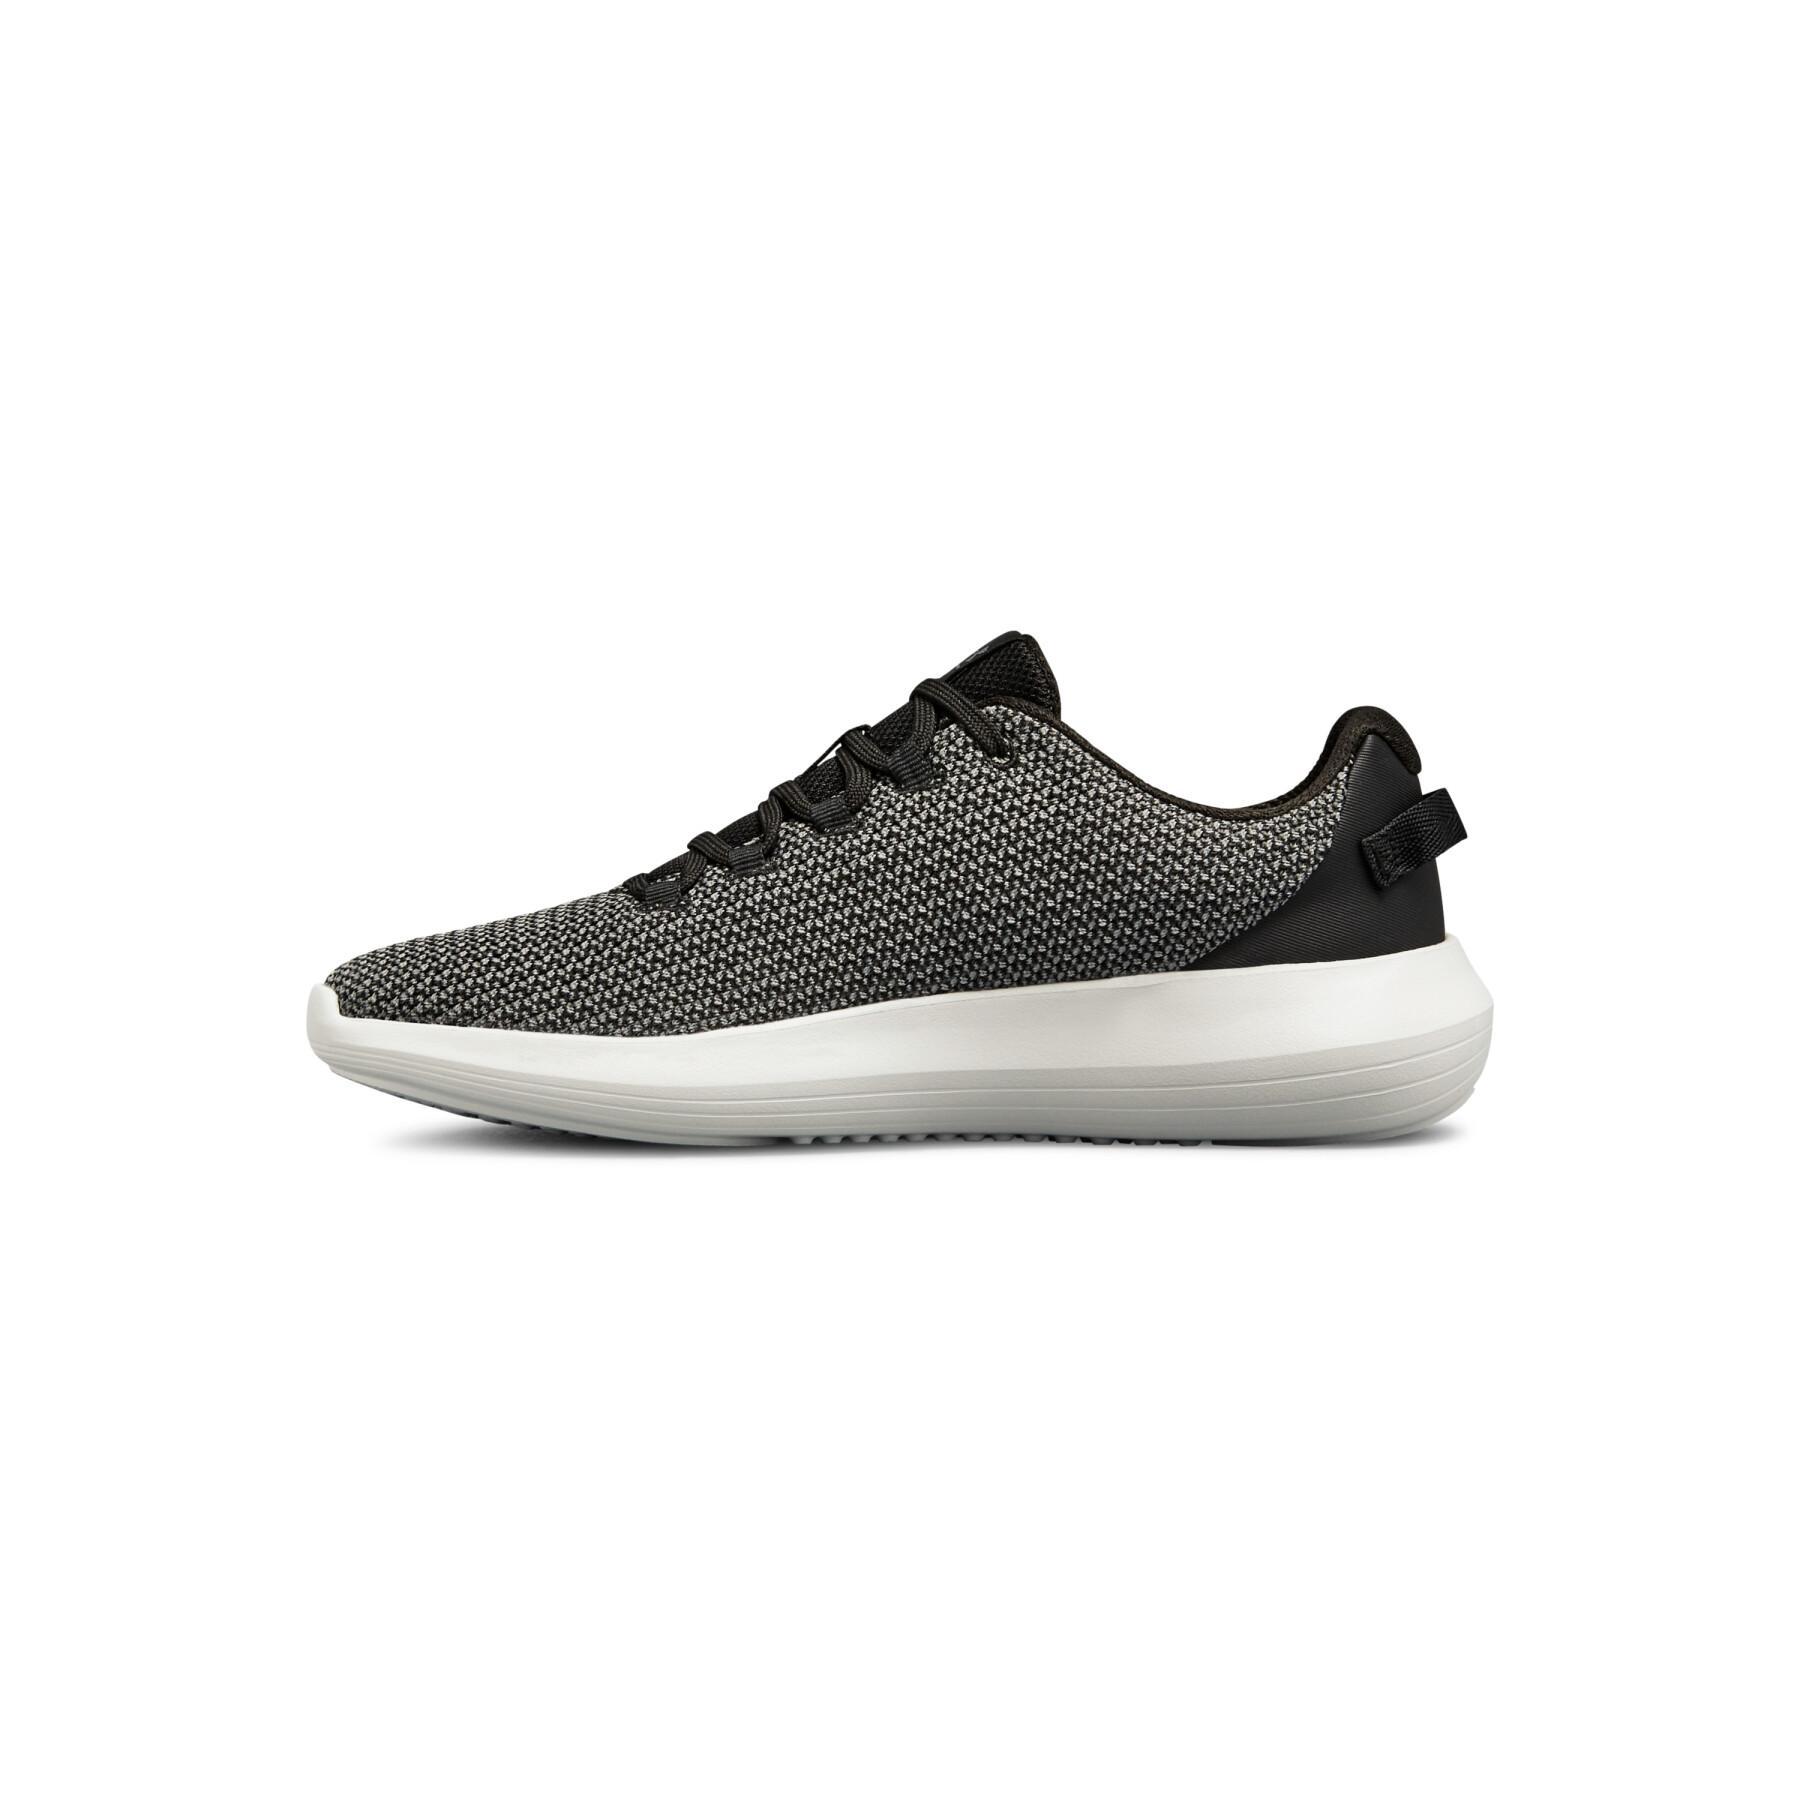 Zapatos de mujer Under Armour Ripple Sportstyle